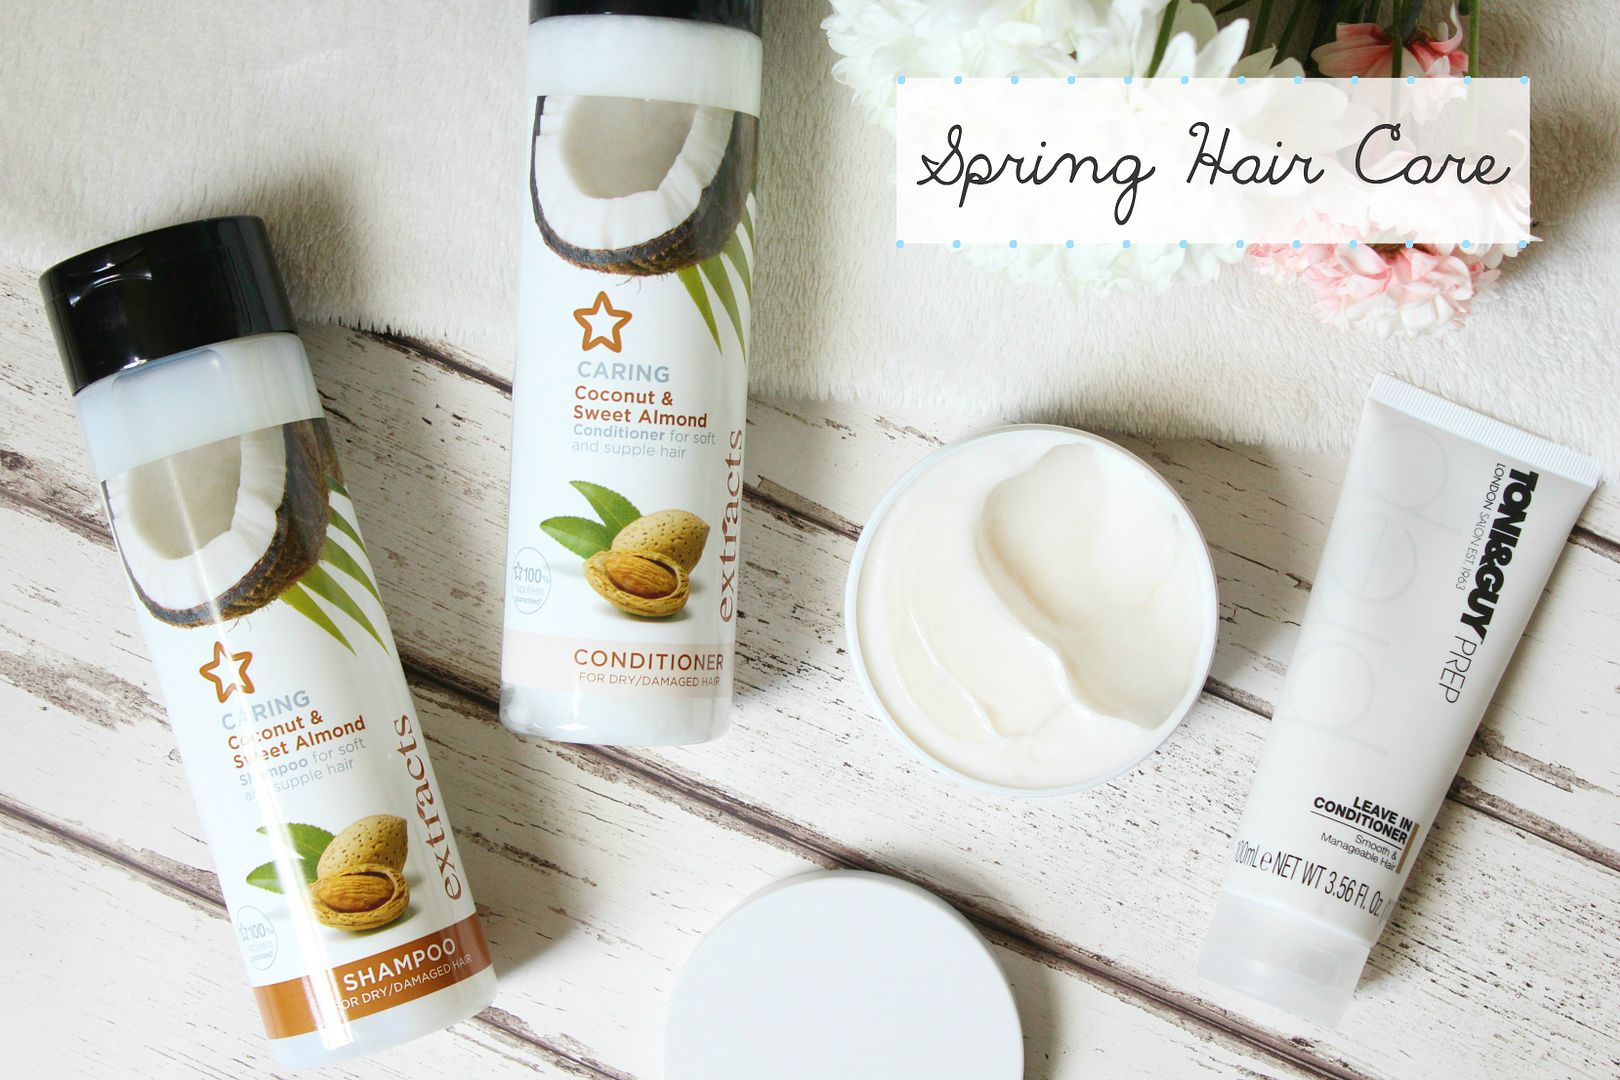 Spring Hair Care Routine Shampoo Conditioner Mask Super Drug Toni And Guy Review Belle-Amie UK Beauty Fashion Lifestyle Blog